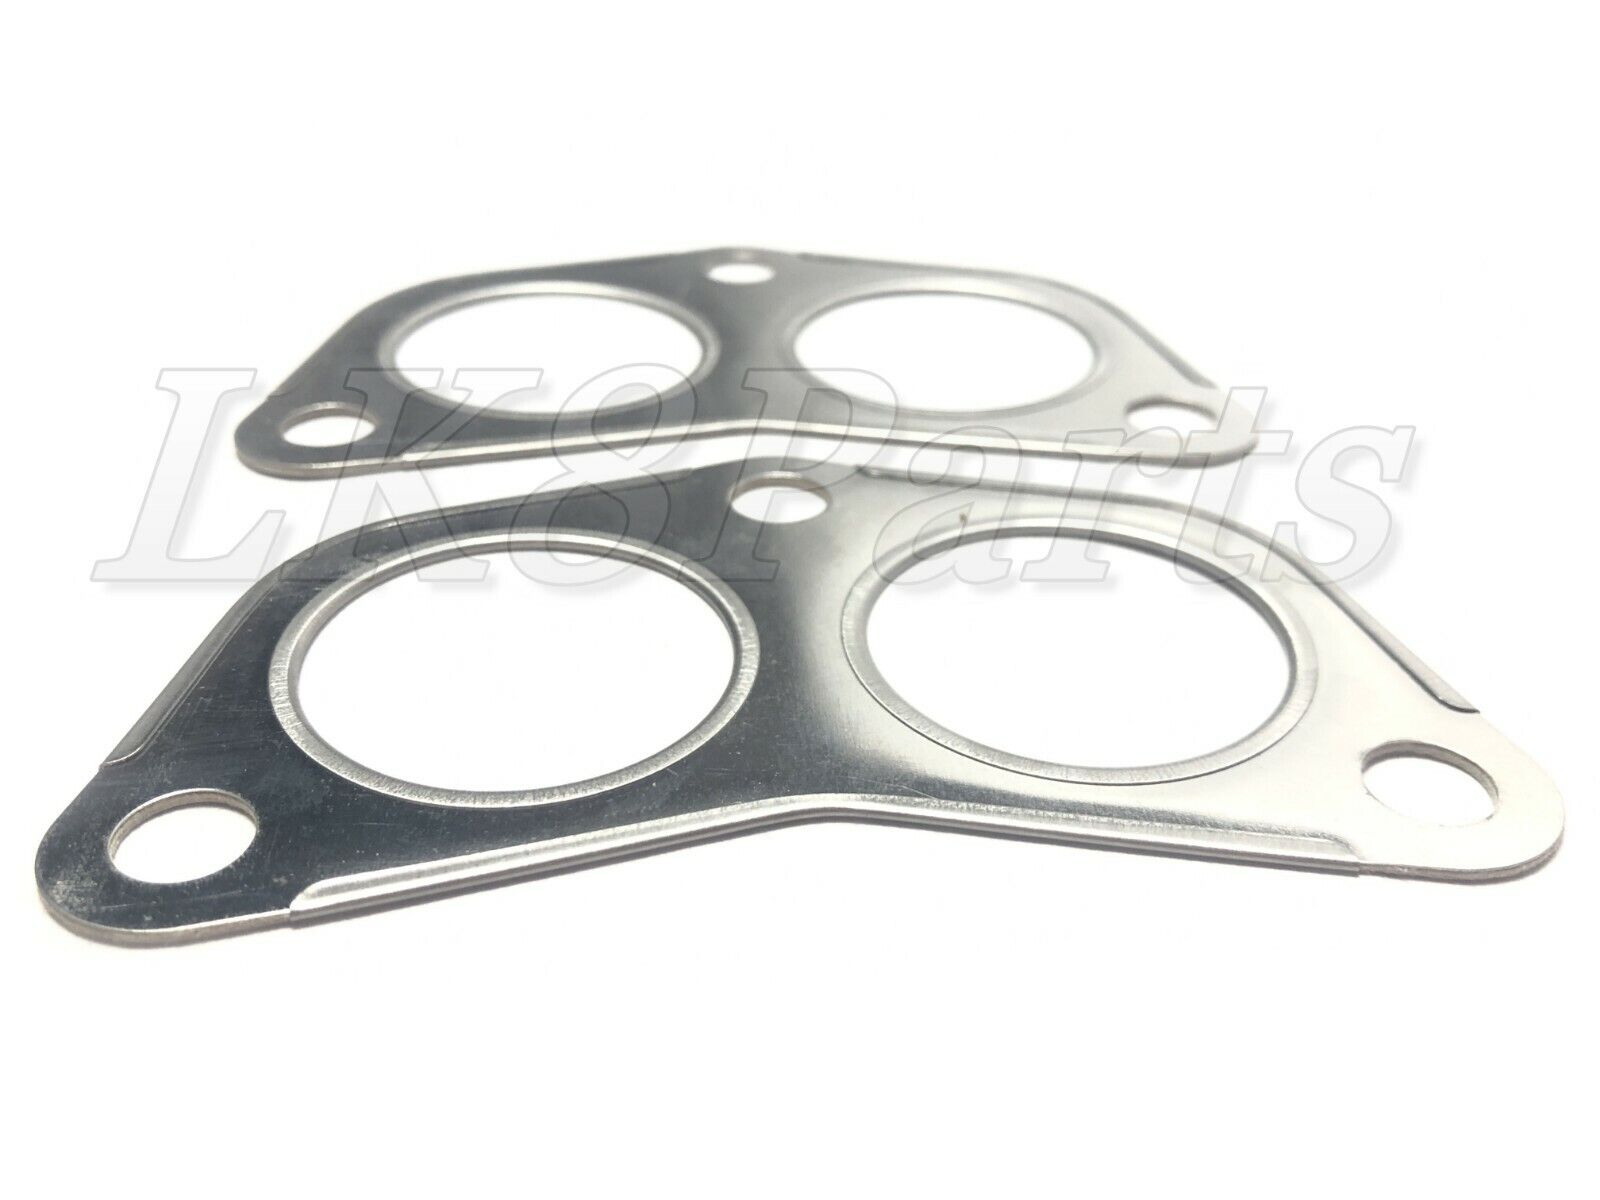 LAND ROVER DISCOVERY 1 2 RANGE DEFENDER EXHAUST GASKET SEAL SET x2 ETC4524 NEW